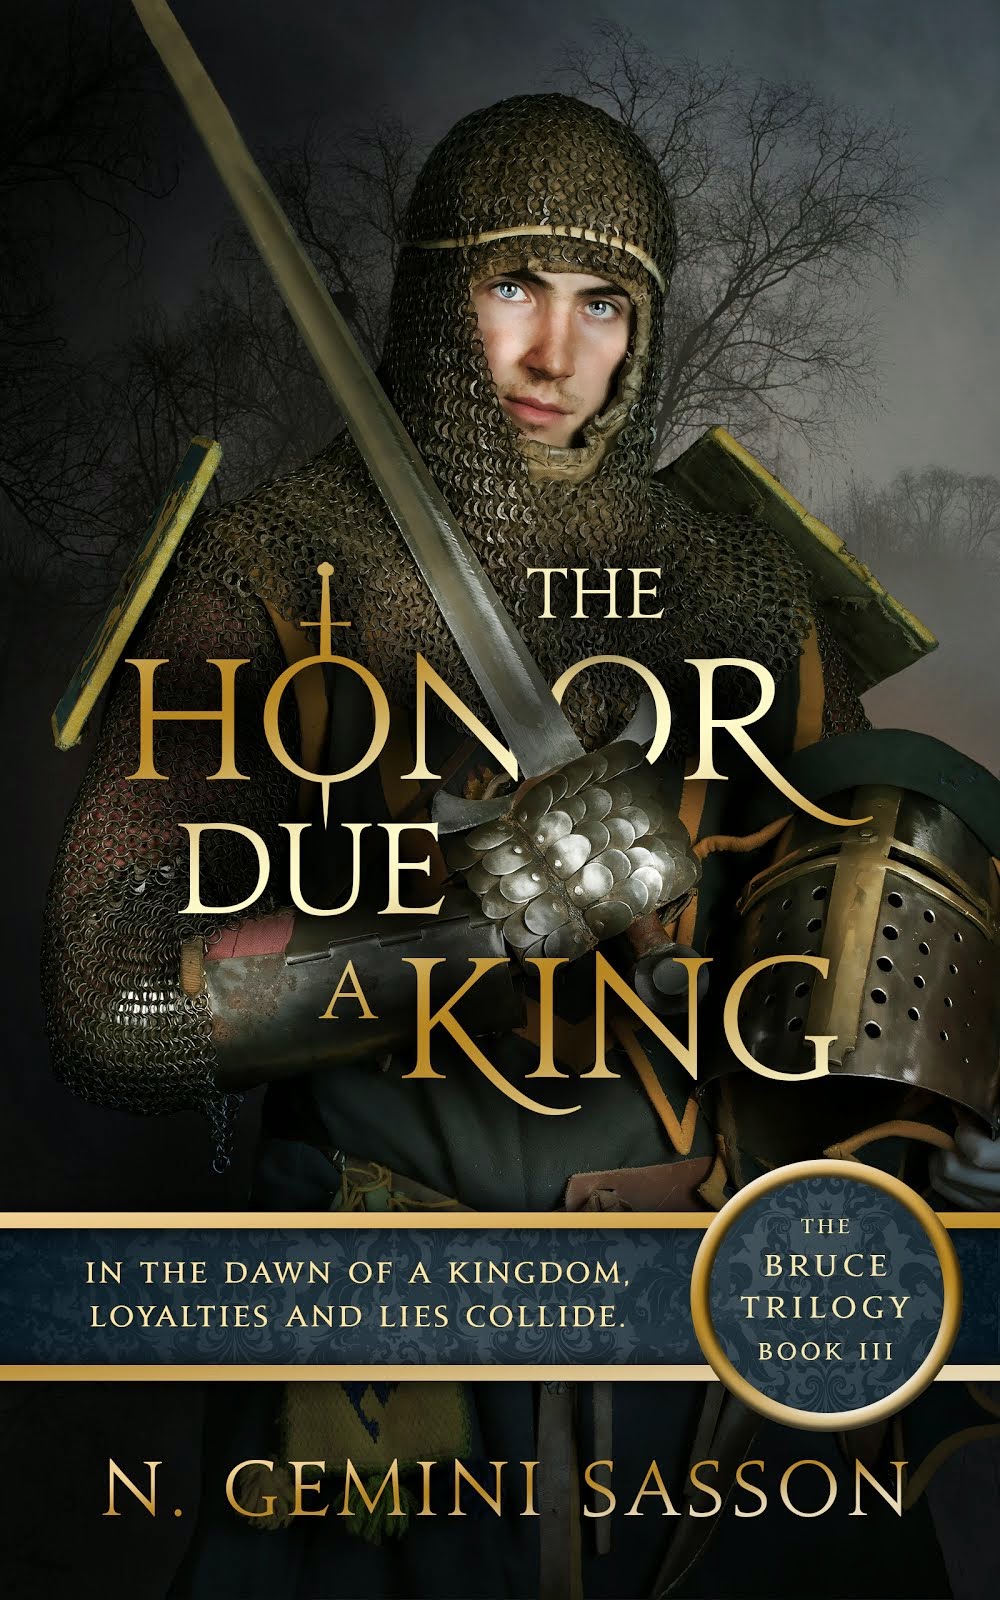 The Honor Due a King (The Bruce Trilogy: Book III)